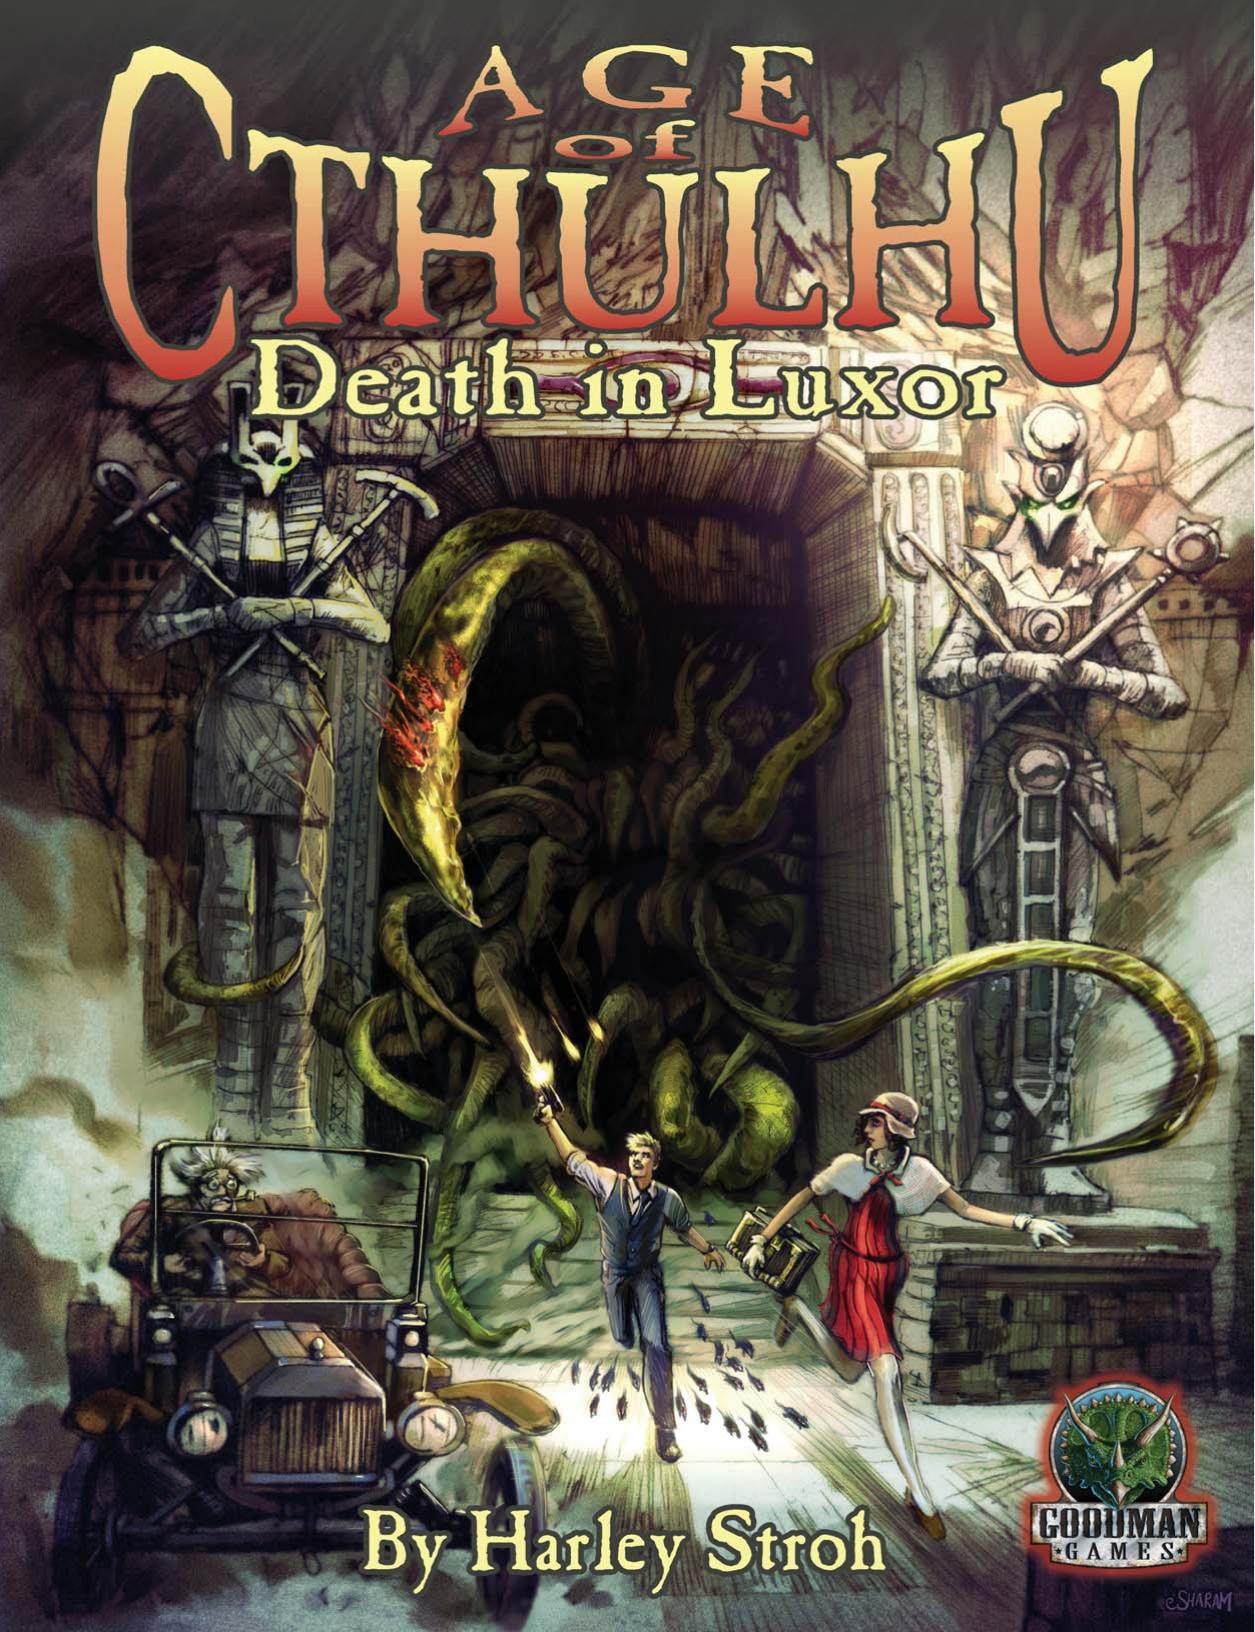 Age of Cthulhu, Vol. I: Death in Luxor